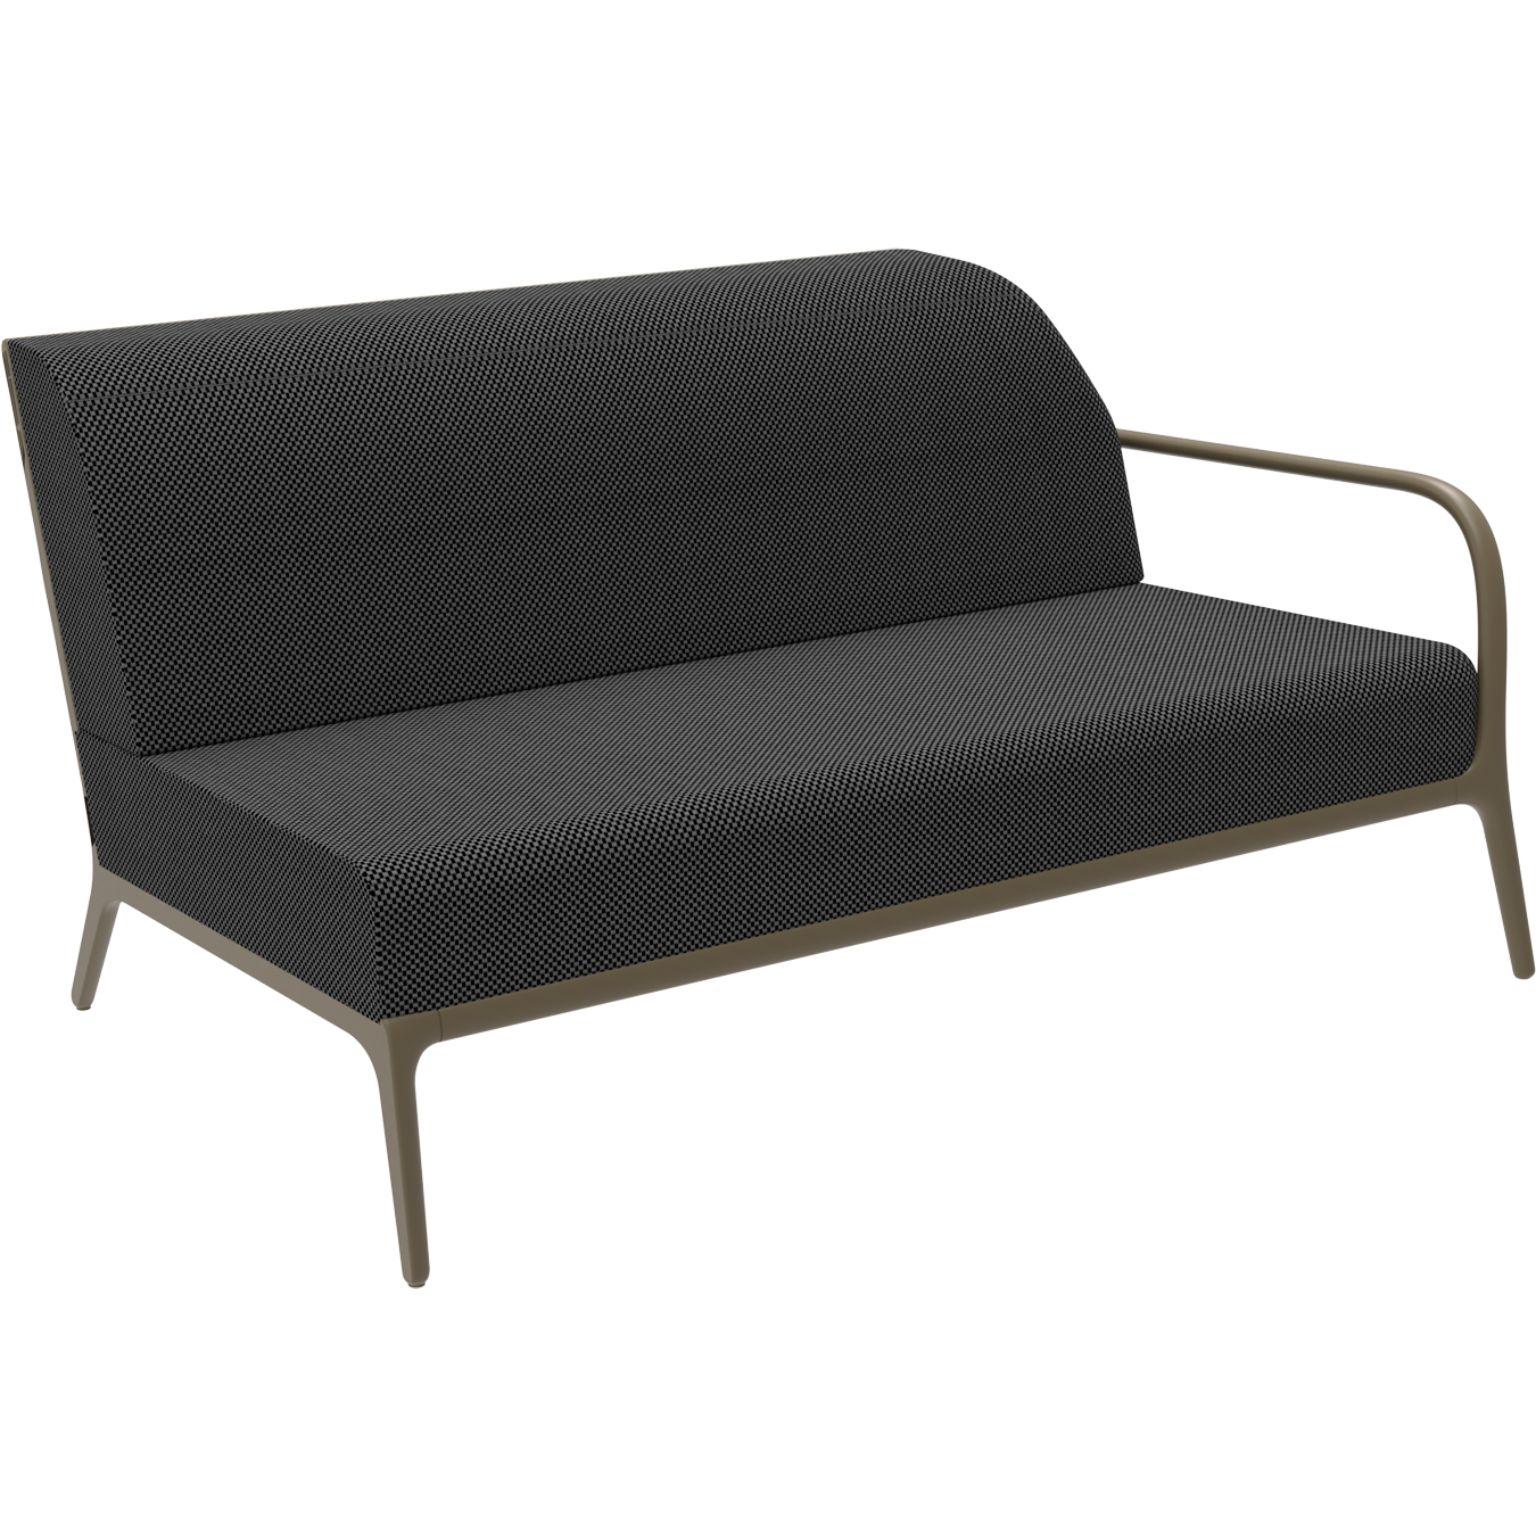 Xaloc Left 160 Bronze Modular sofa by MOWEE
Dimensions: D100 x W160 x H81 cm (Seat Height 42cm)
Material: Aluminium, Textile
Weight: 37 kg
Also Available in different colors and finishes. 

 Xaloc synthesizes the lines of interior furniture to